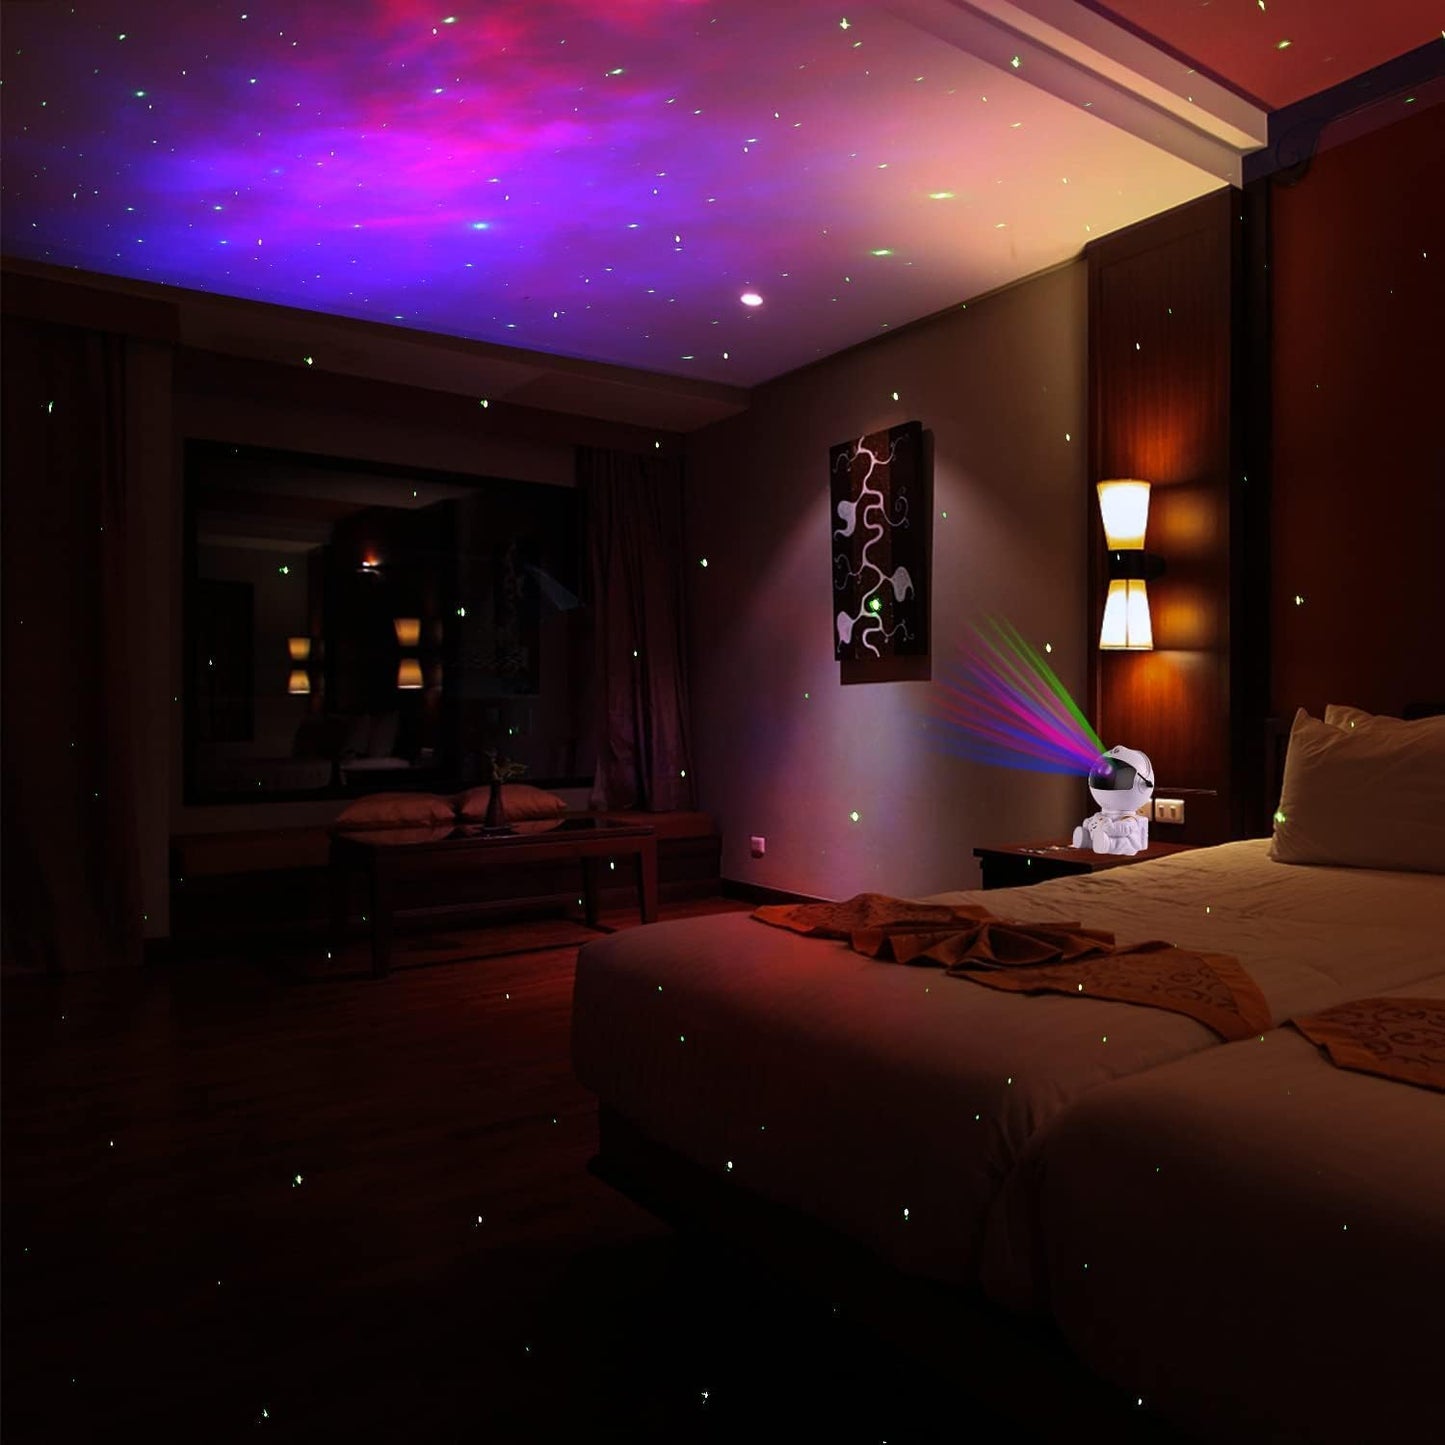 Astronaut Galaxy Sky Projector with 8 Nebula Modes 2 Star Modes, Remote Control 360° Rotation Adjustable Brightness Speed for Bedroom Ceiling Children Adults - magcubicvision.com